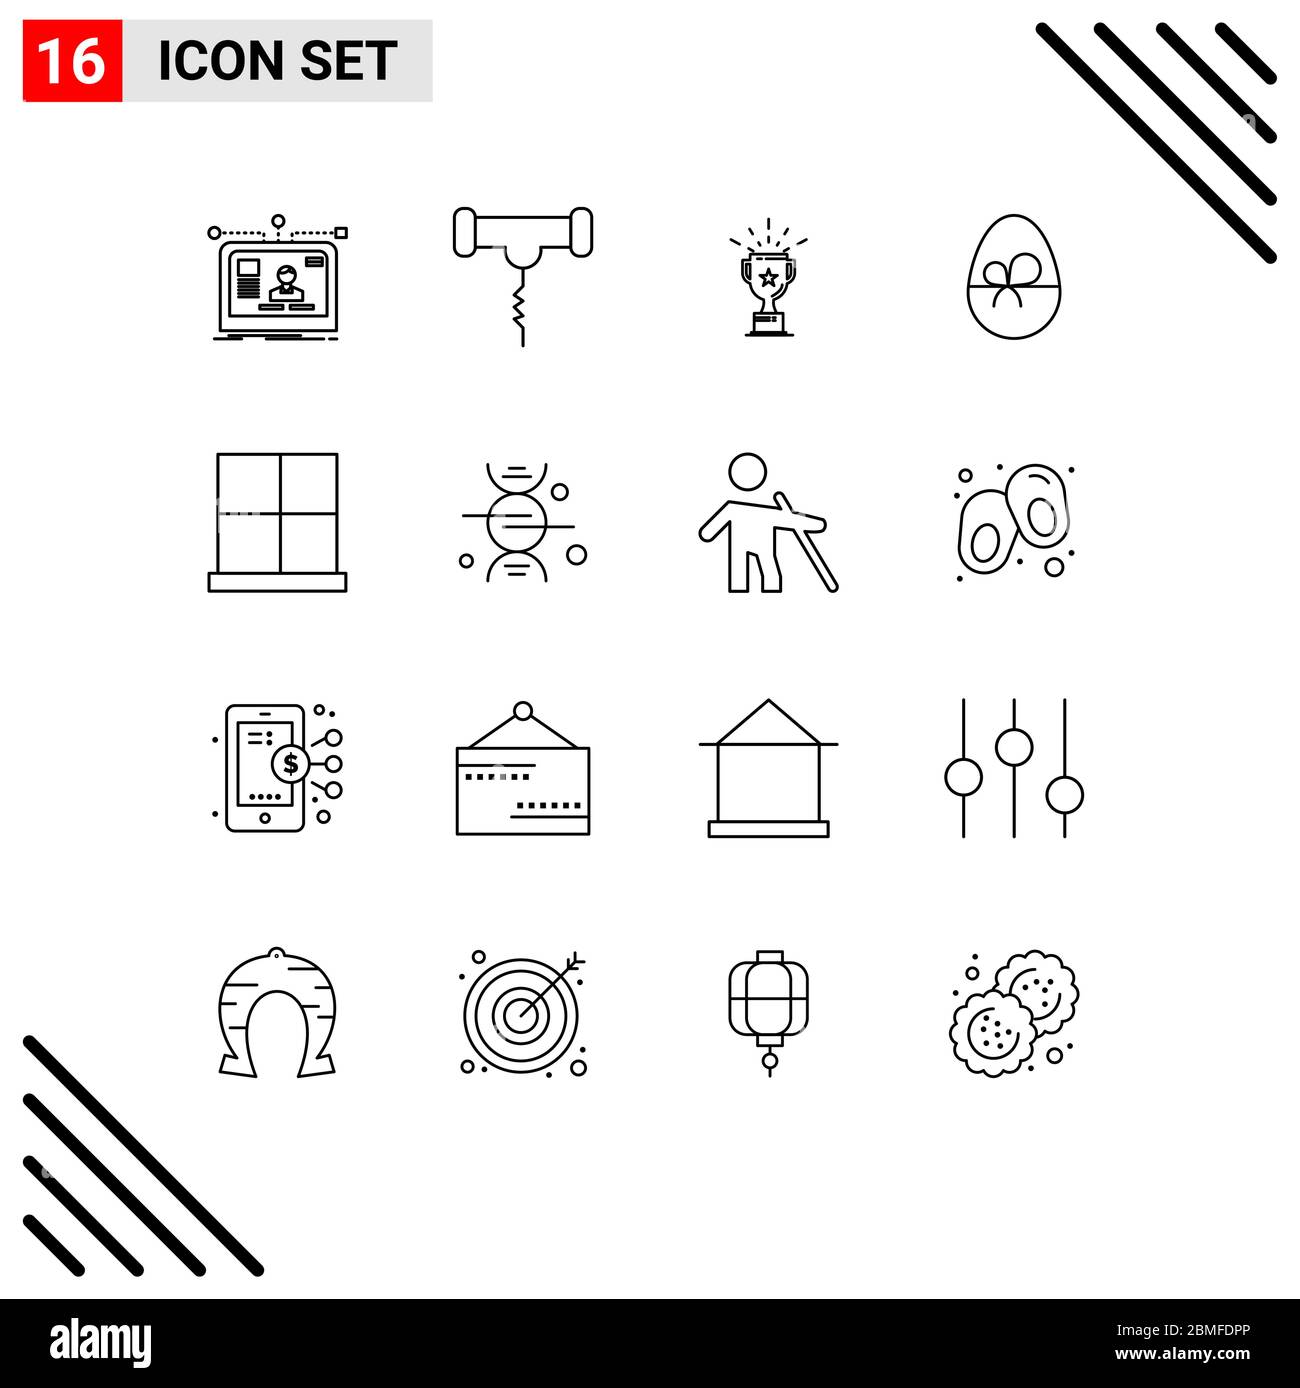 Universal Icon Symbols Group of 16 Modern Outlines of buildings, easter, stork, gift, trophy Editable Vector Design Elements Stock Vector